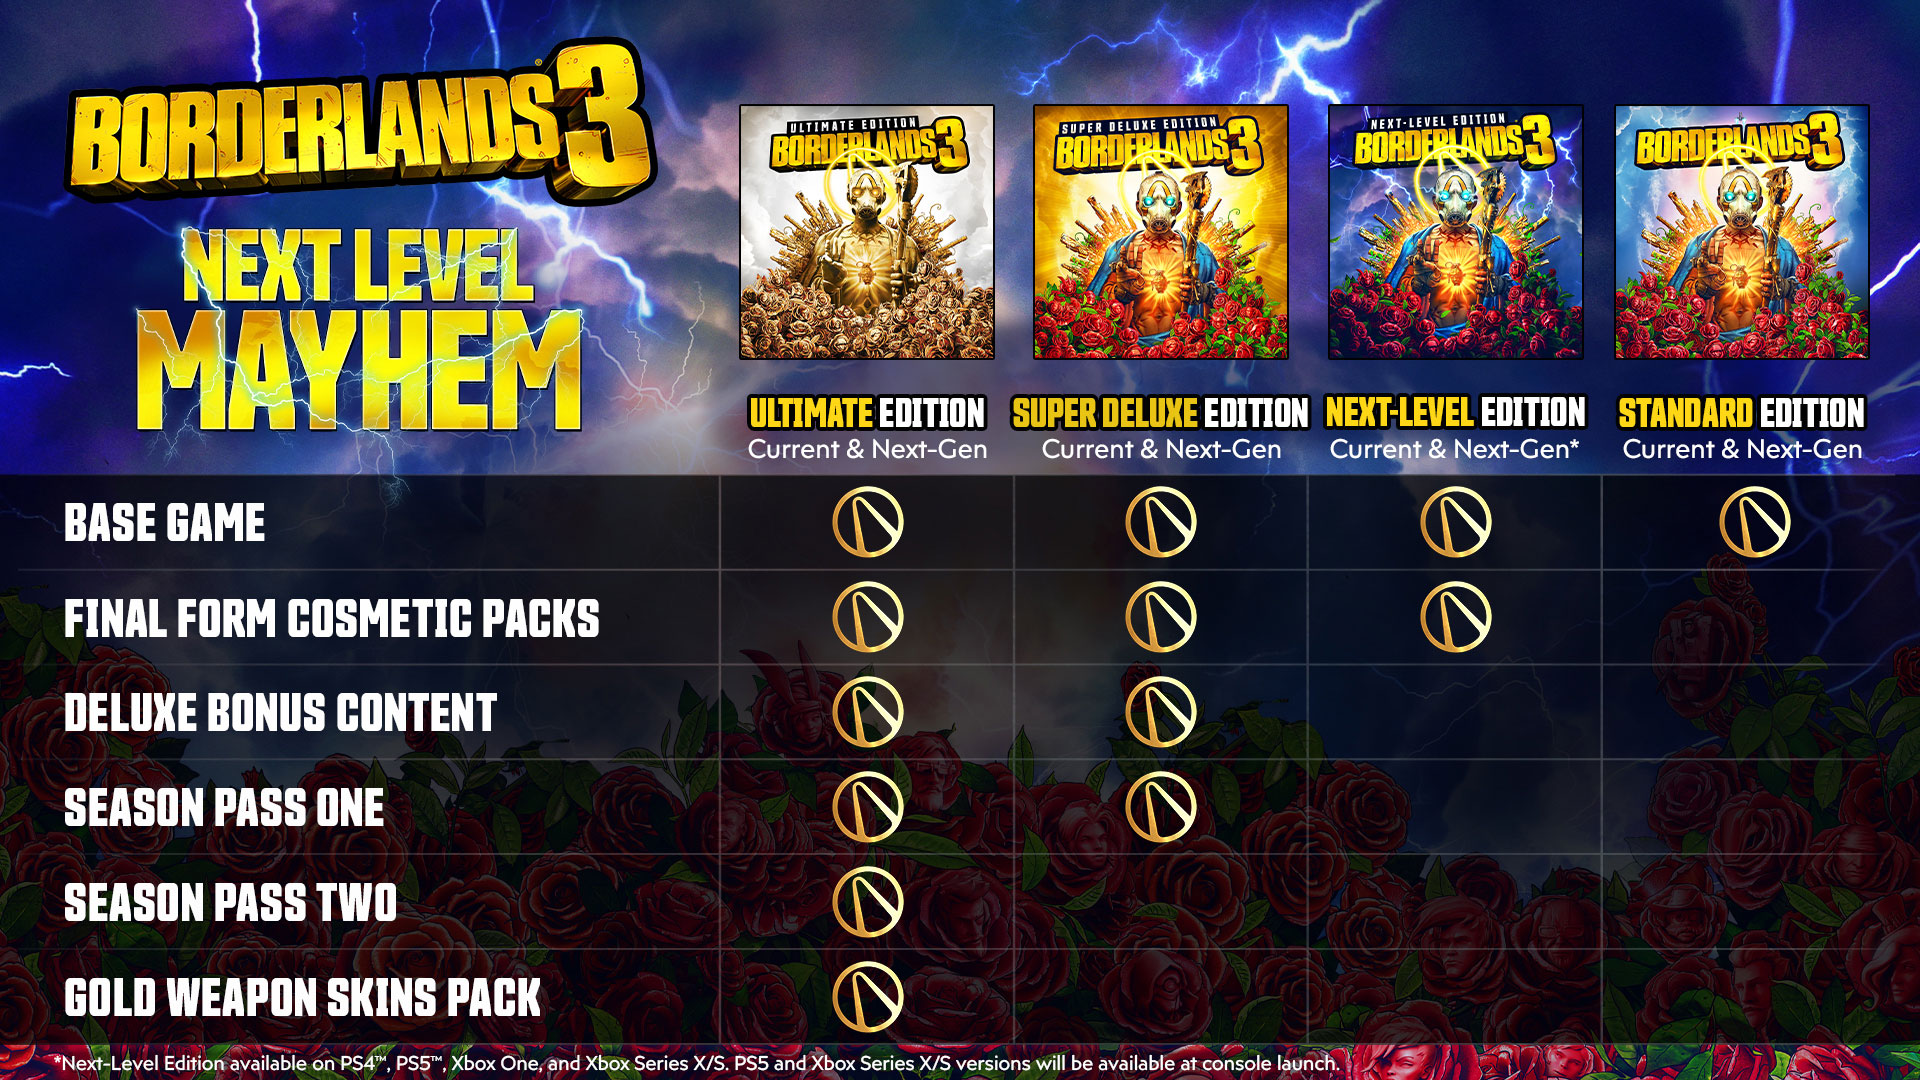 Out Now Borderlands 3 Next Gen Upgrade Ultimate Edition Season Pass 2 And More